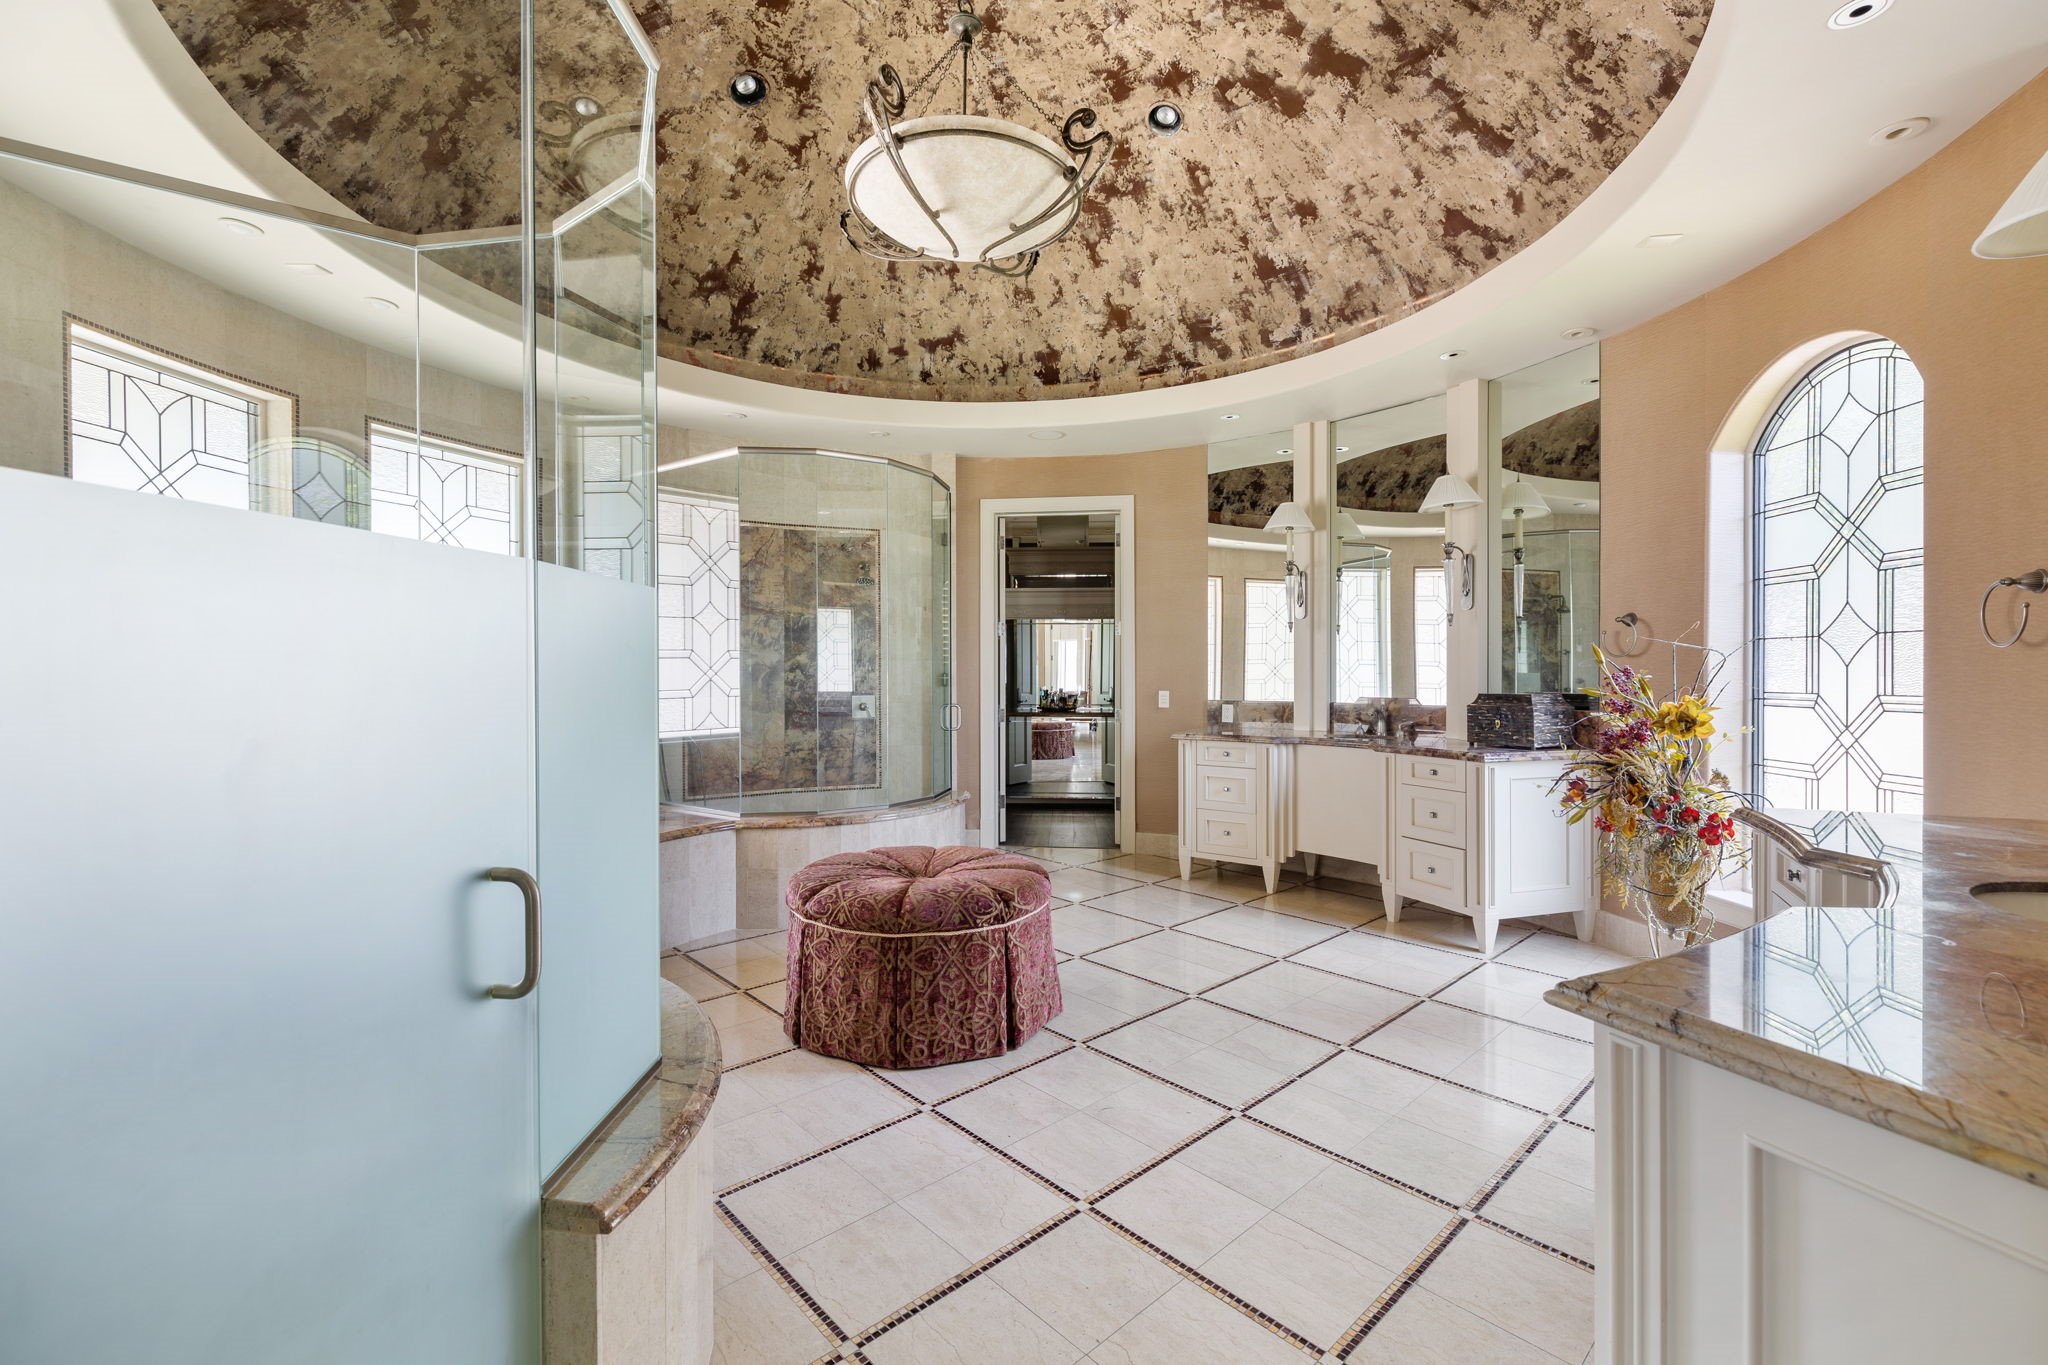 Good morning, Gorgeous!  Welcome to the Master Suite's Bathing Spa. The acoustics and flow of light are accentuated by dome ceiling with its illustrious faux finish.